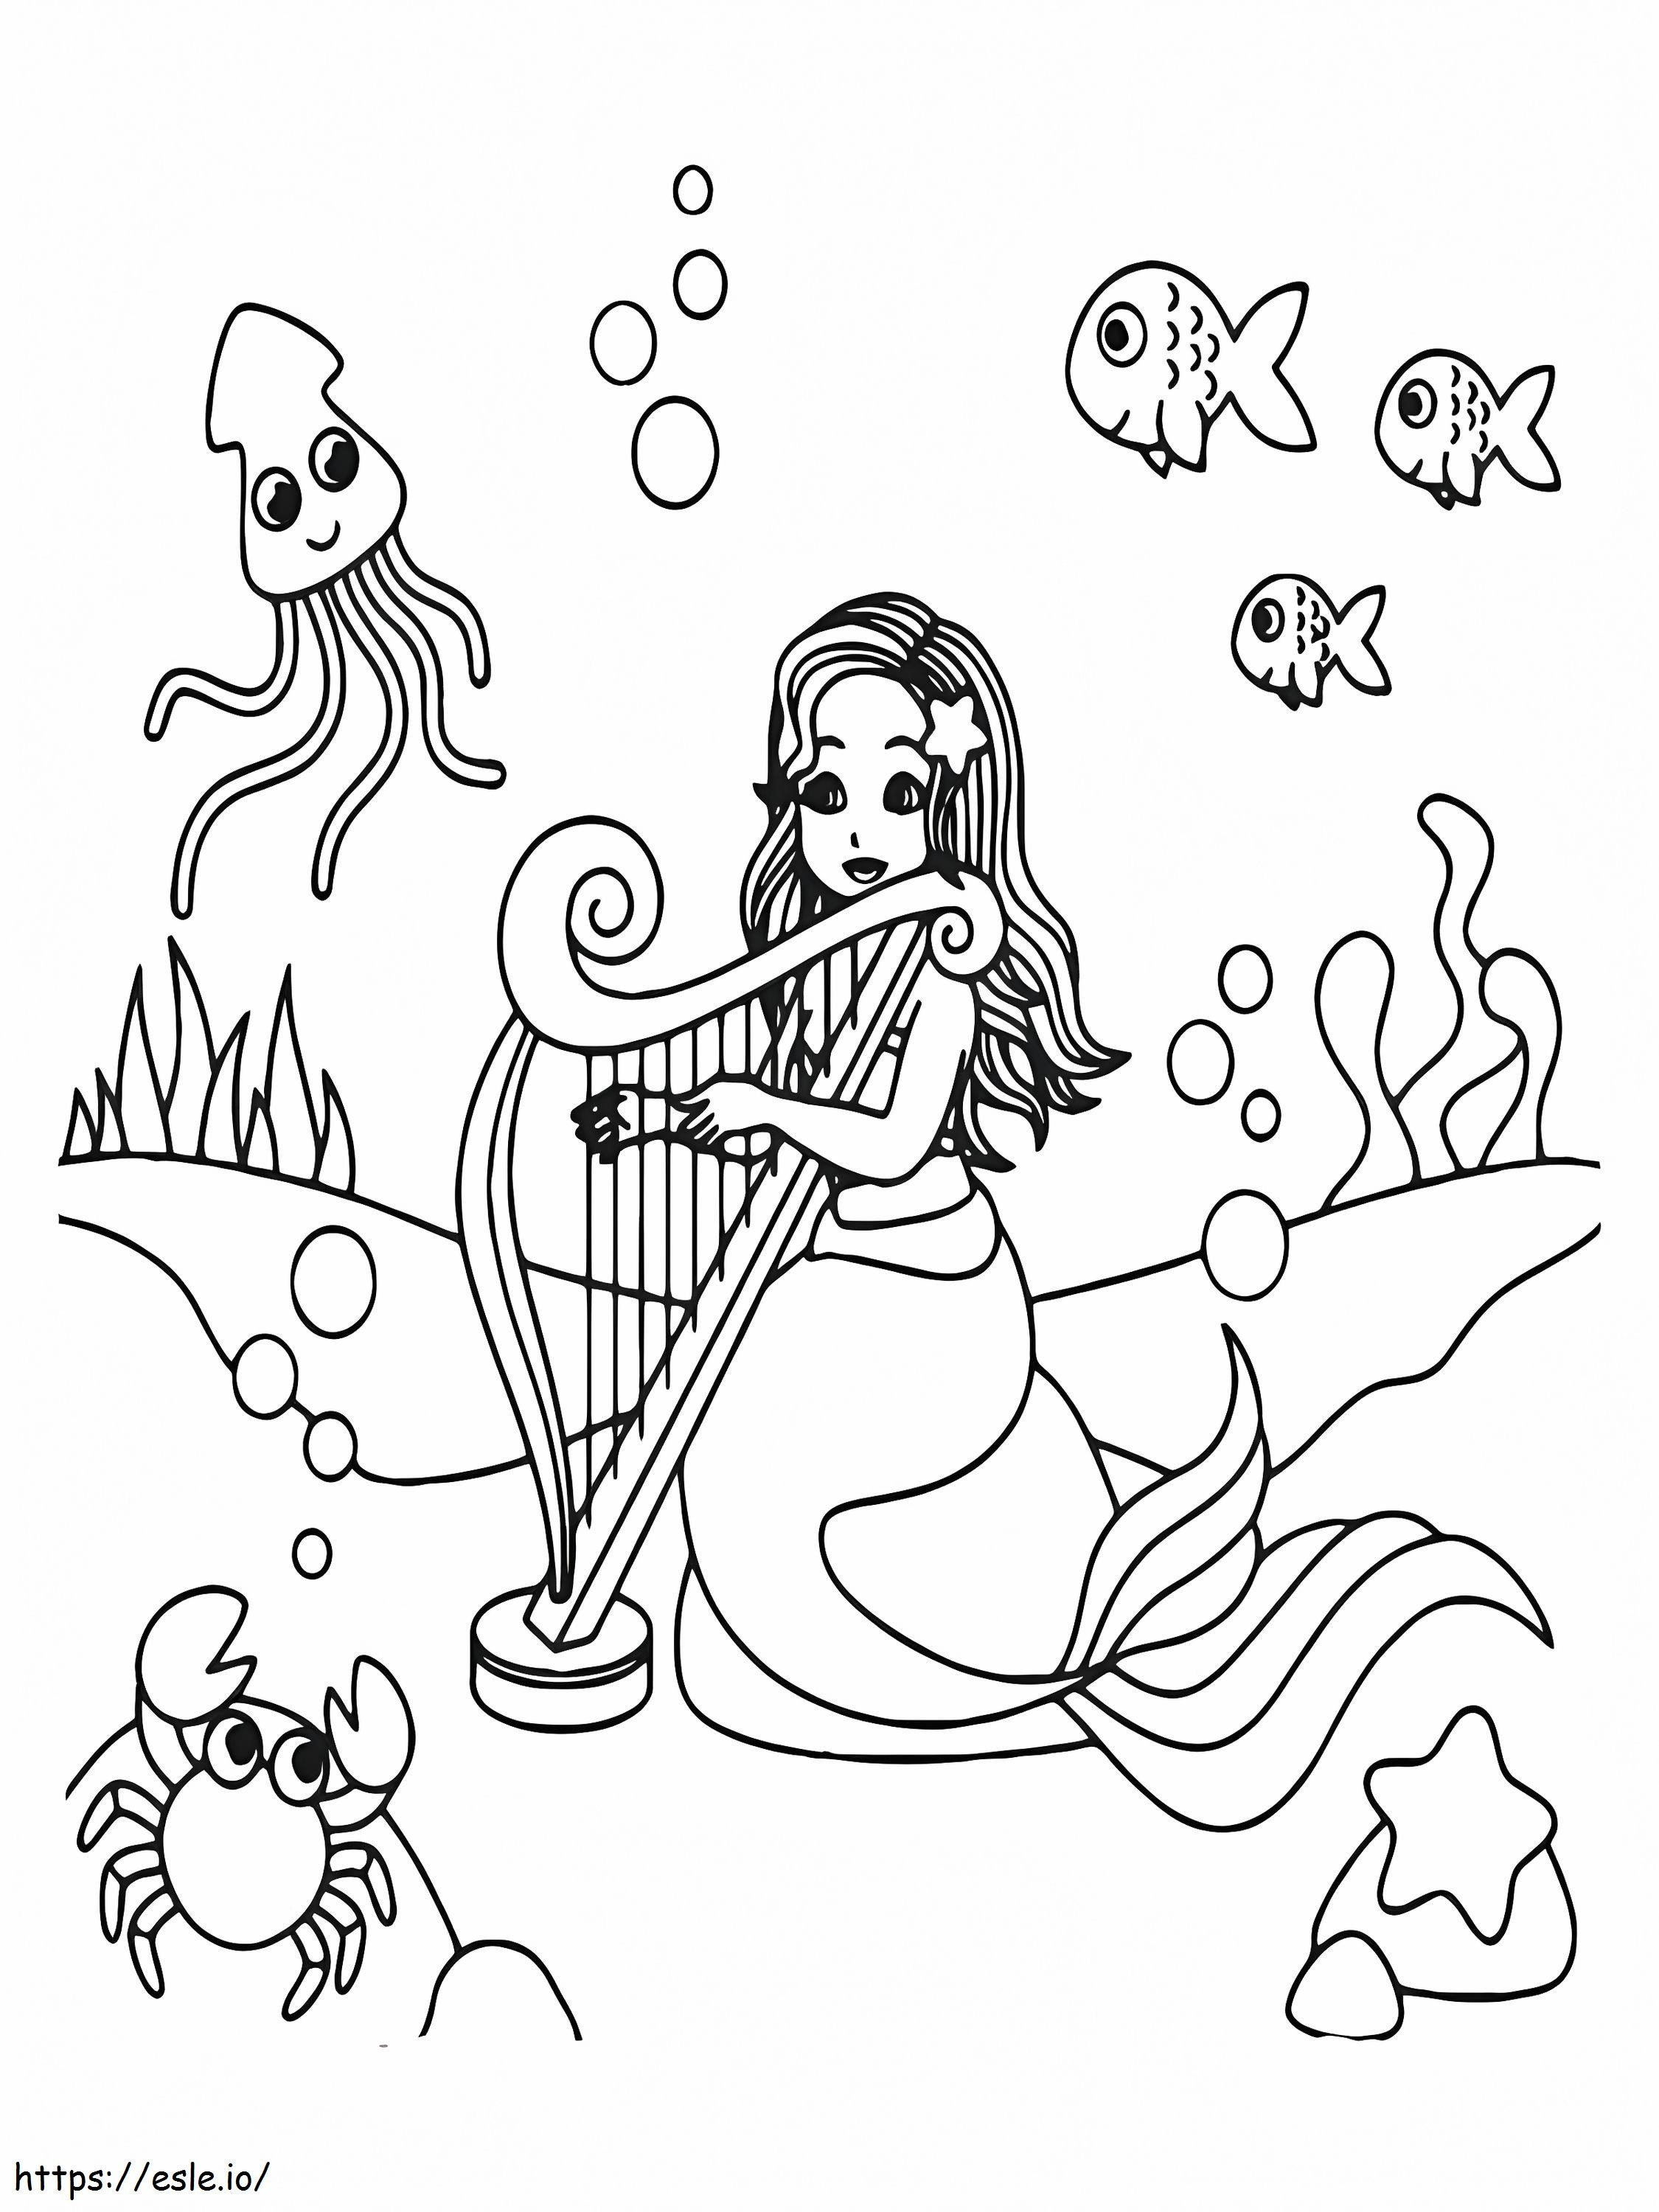 Mermaid Playing Harp With Sea Animals coloring page